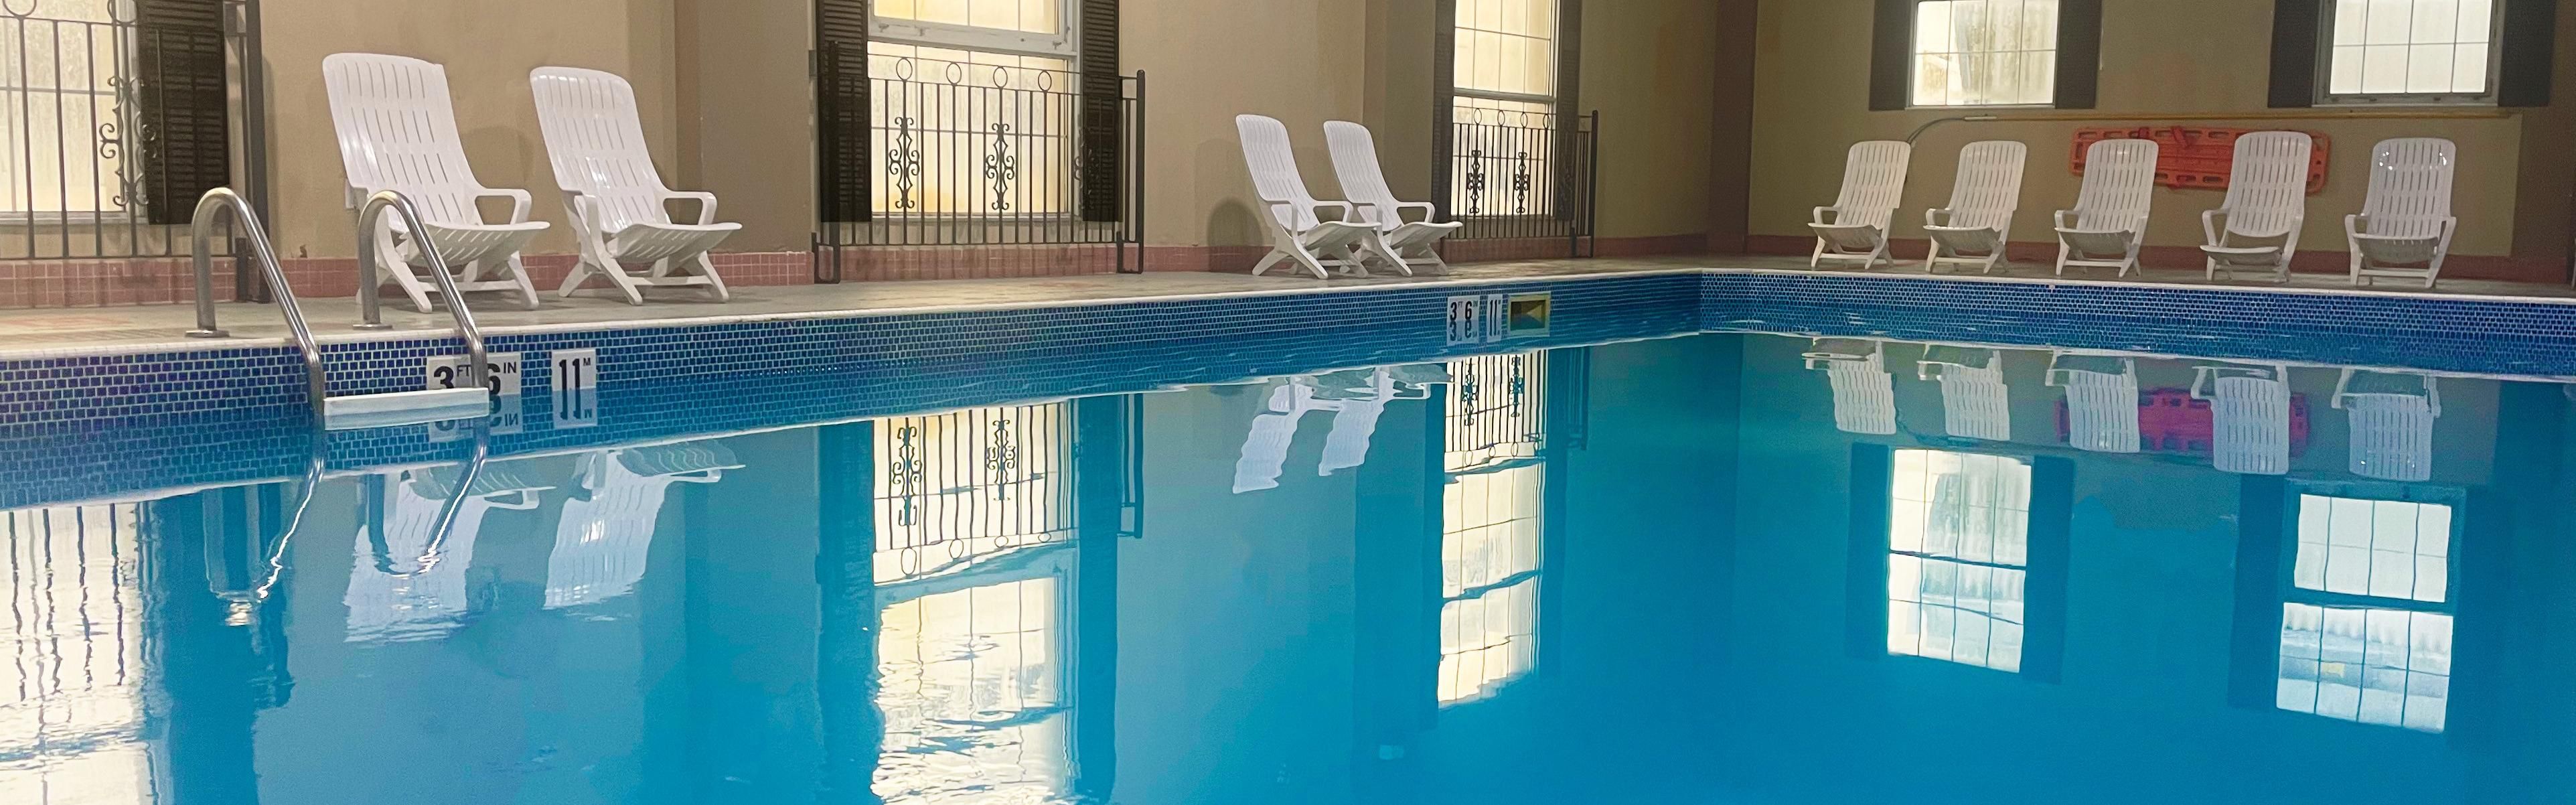 Enjoy our large heated indoor swimming pool